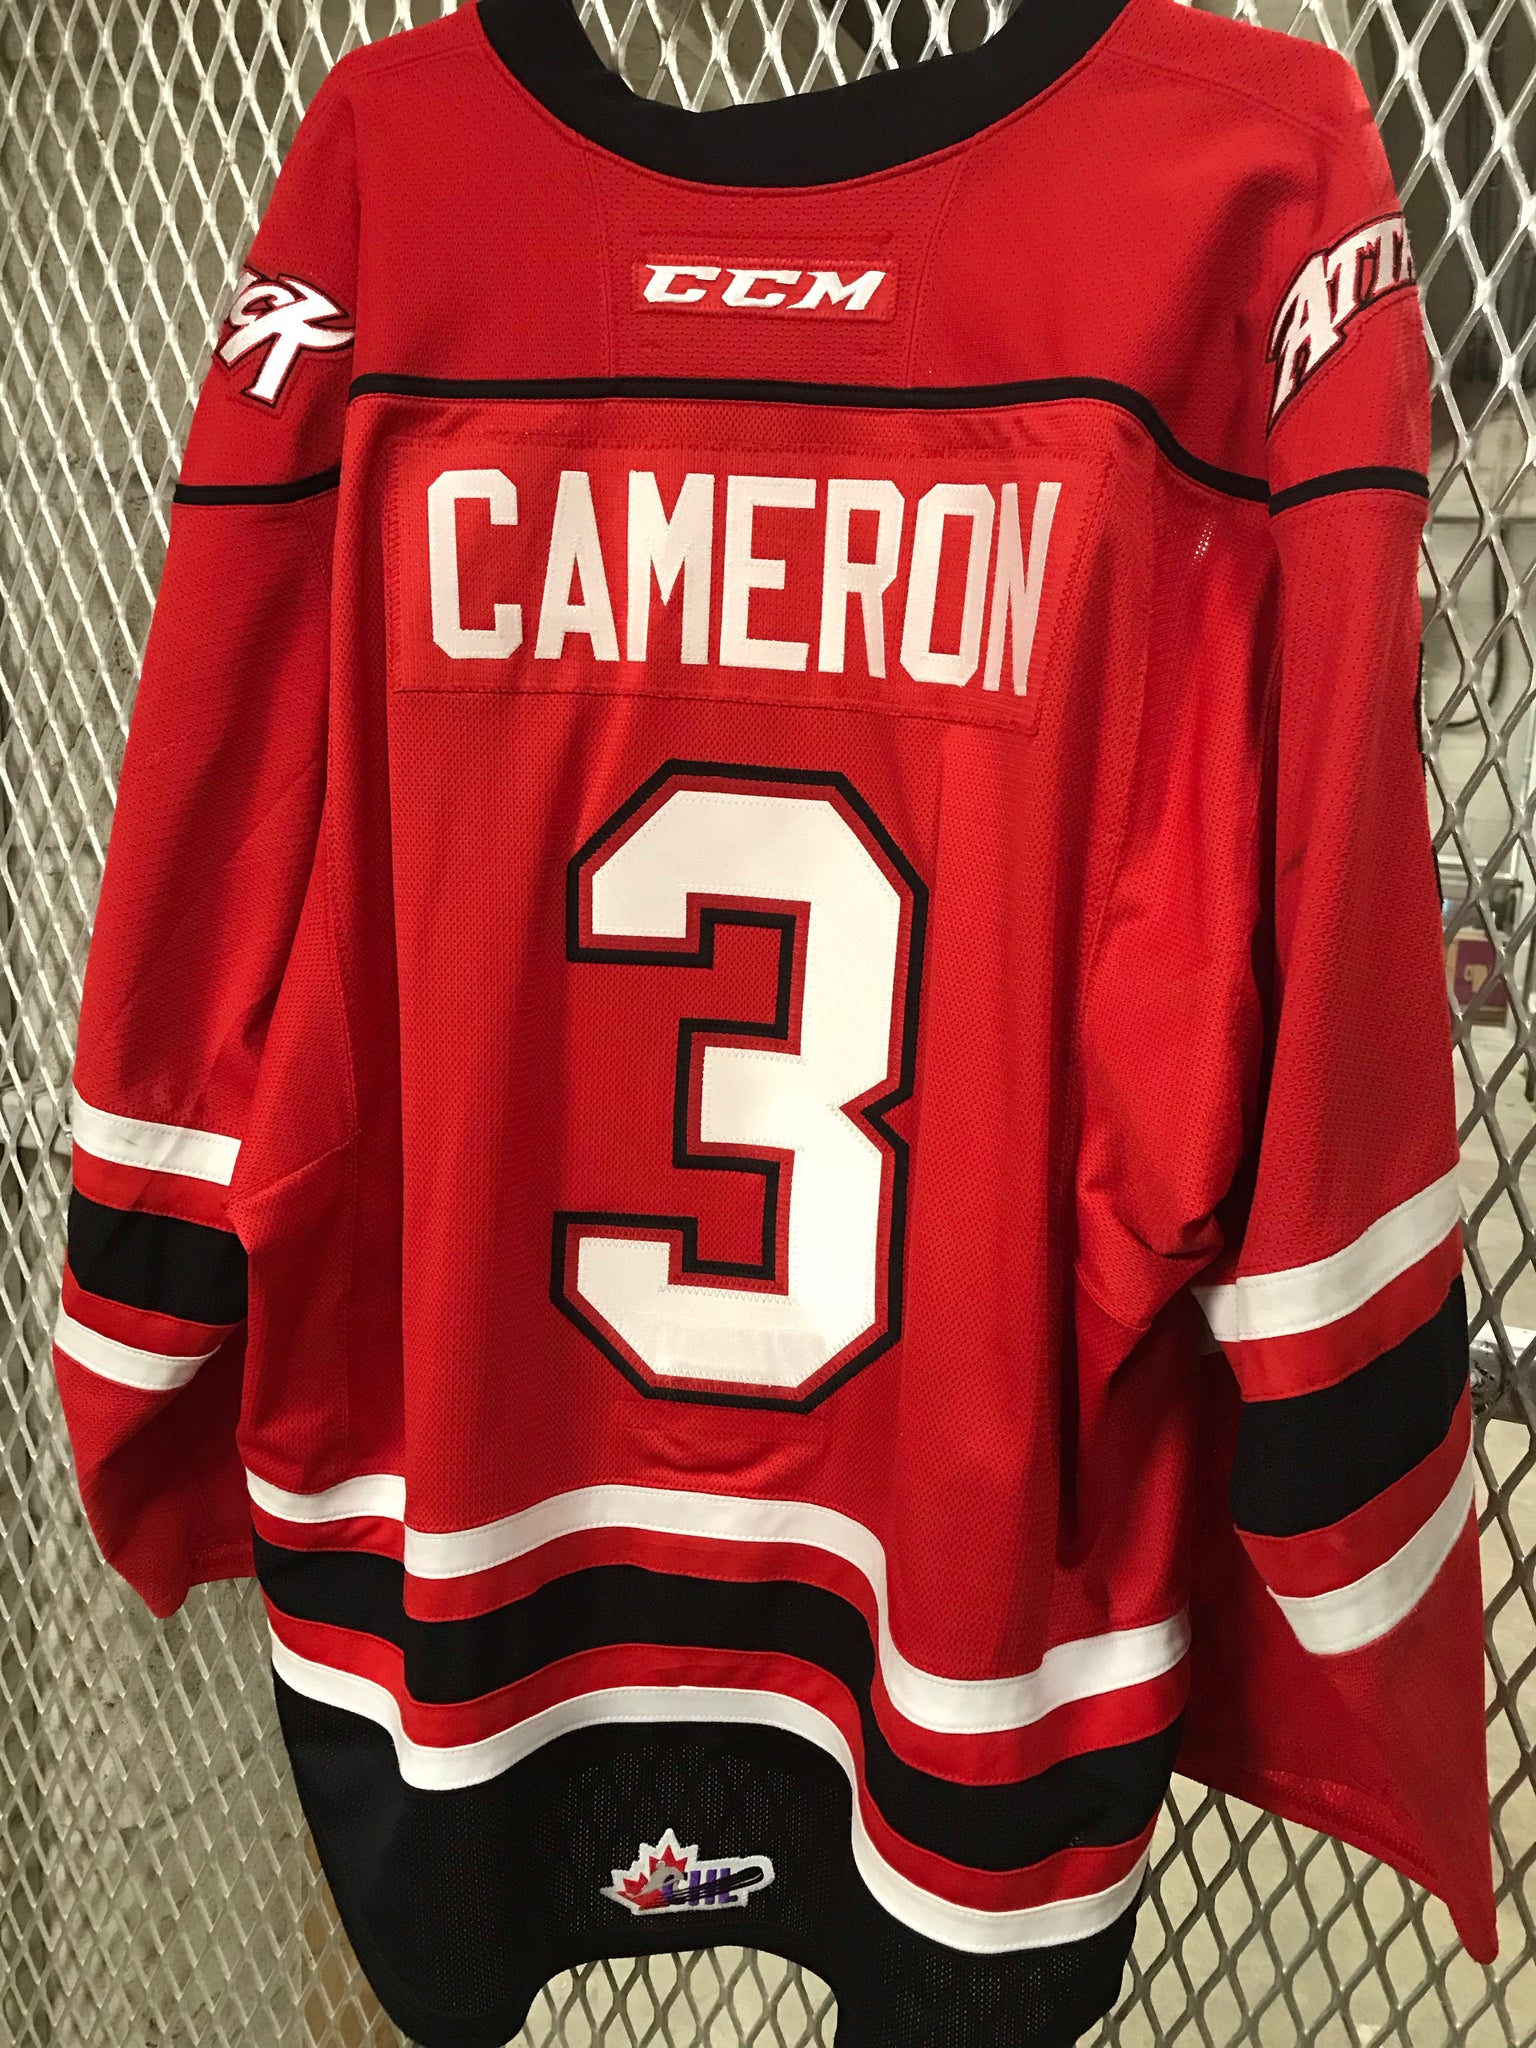 #3 Cole Cameron Game Worn Jersey